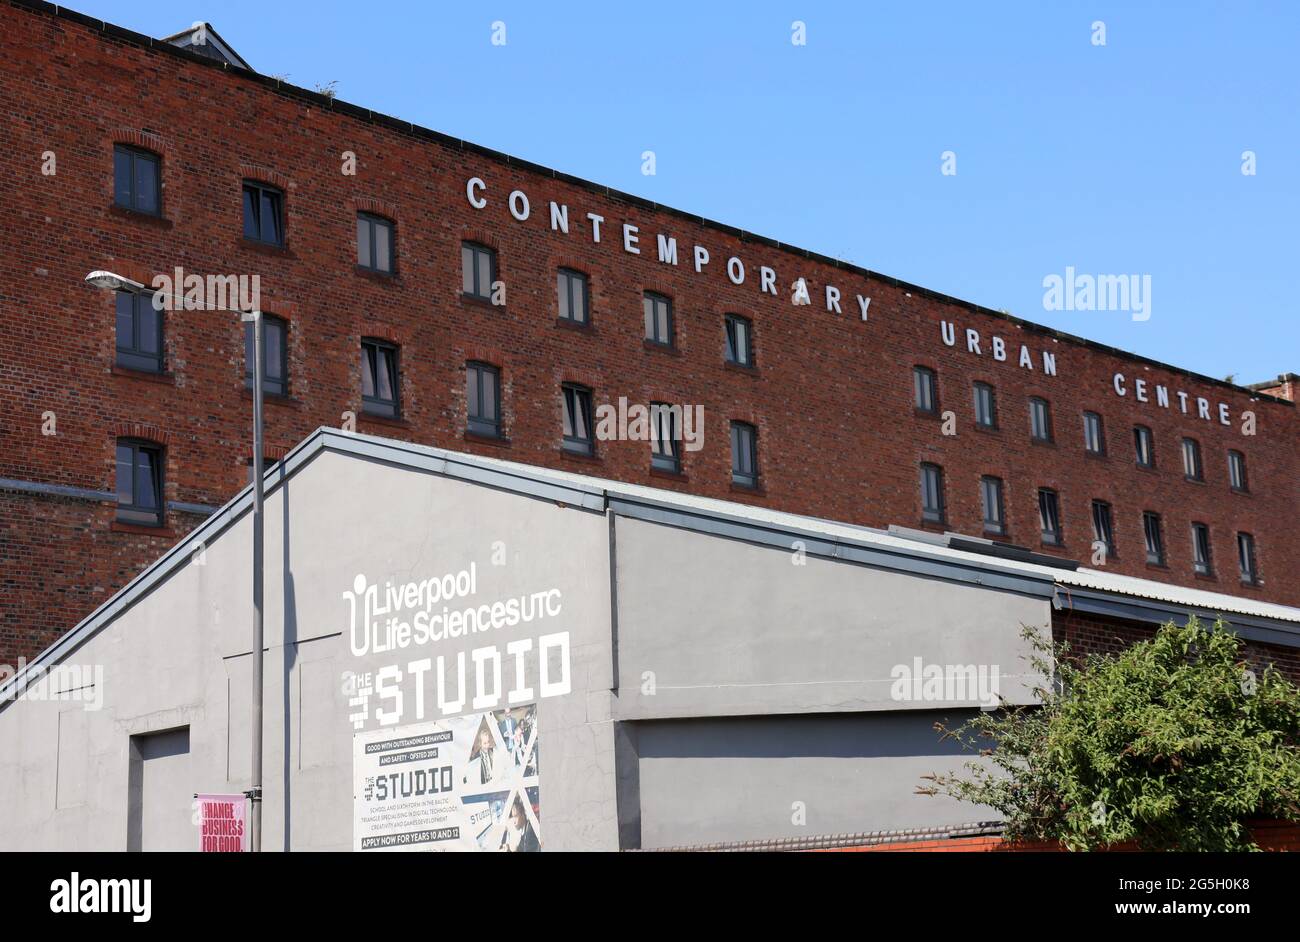 The Contemporary Urban Centre building in an old Victorian era oil warehouse at Liverpool Stock Photo